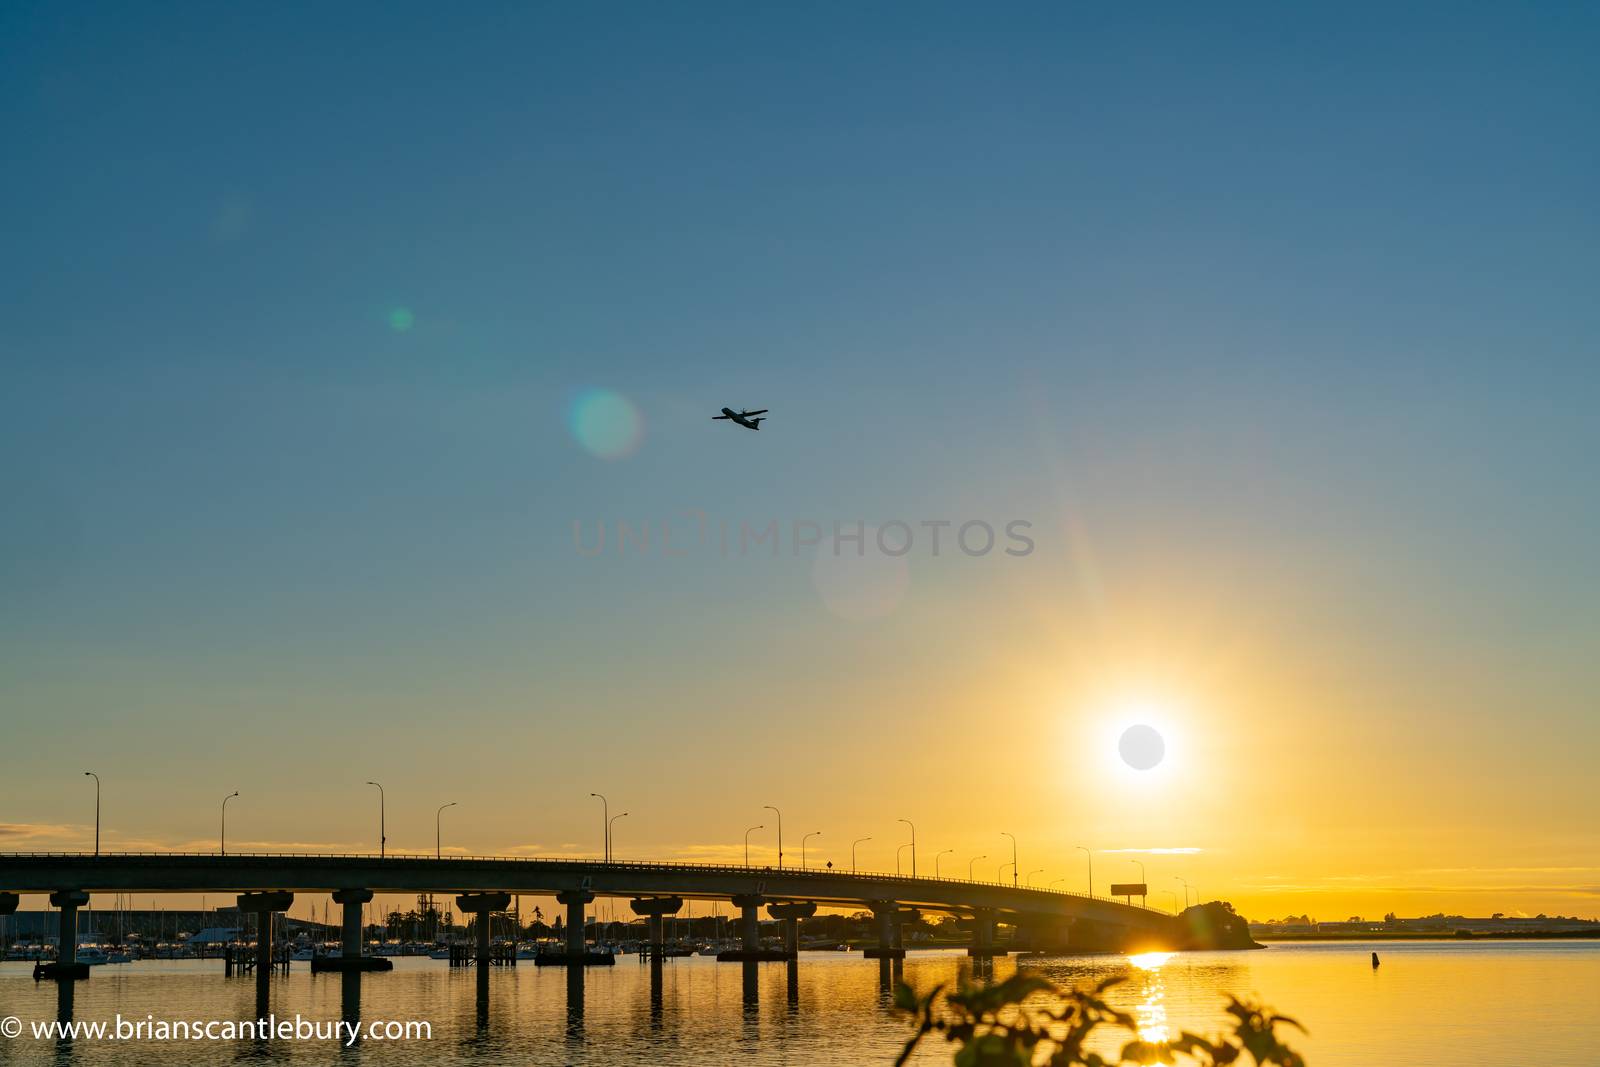 Sweeping lines of Tauranga Harbour Bridge over calm blue water with glow of rising sun at far end as passenger plane take-off and passes over